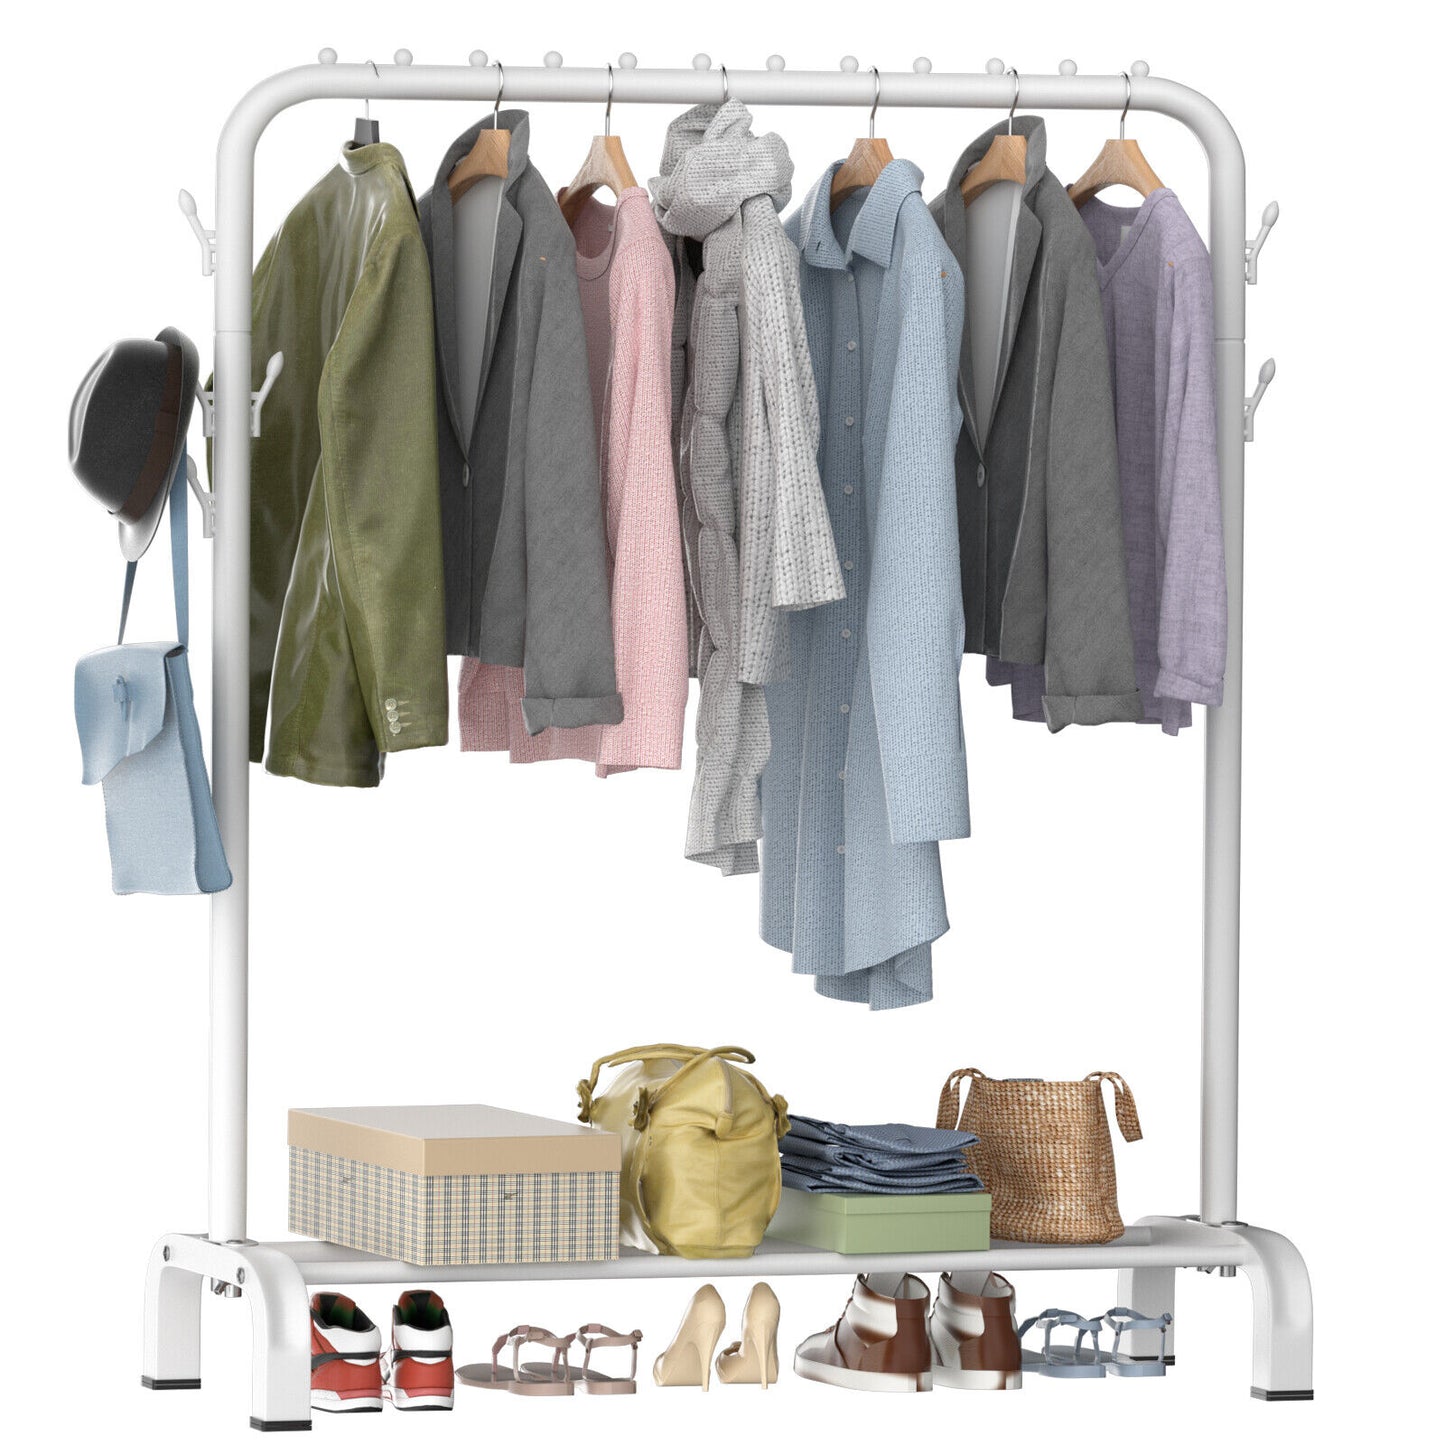 LOEFME Clothes Hanging Rail Rack Heavy Duty Display Stand Shoe Storage w/Shelves